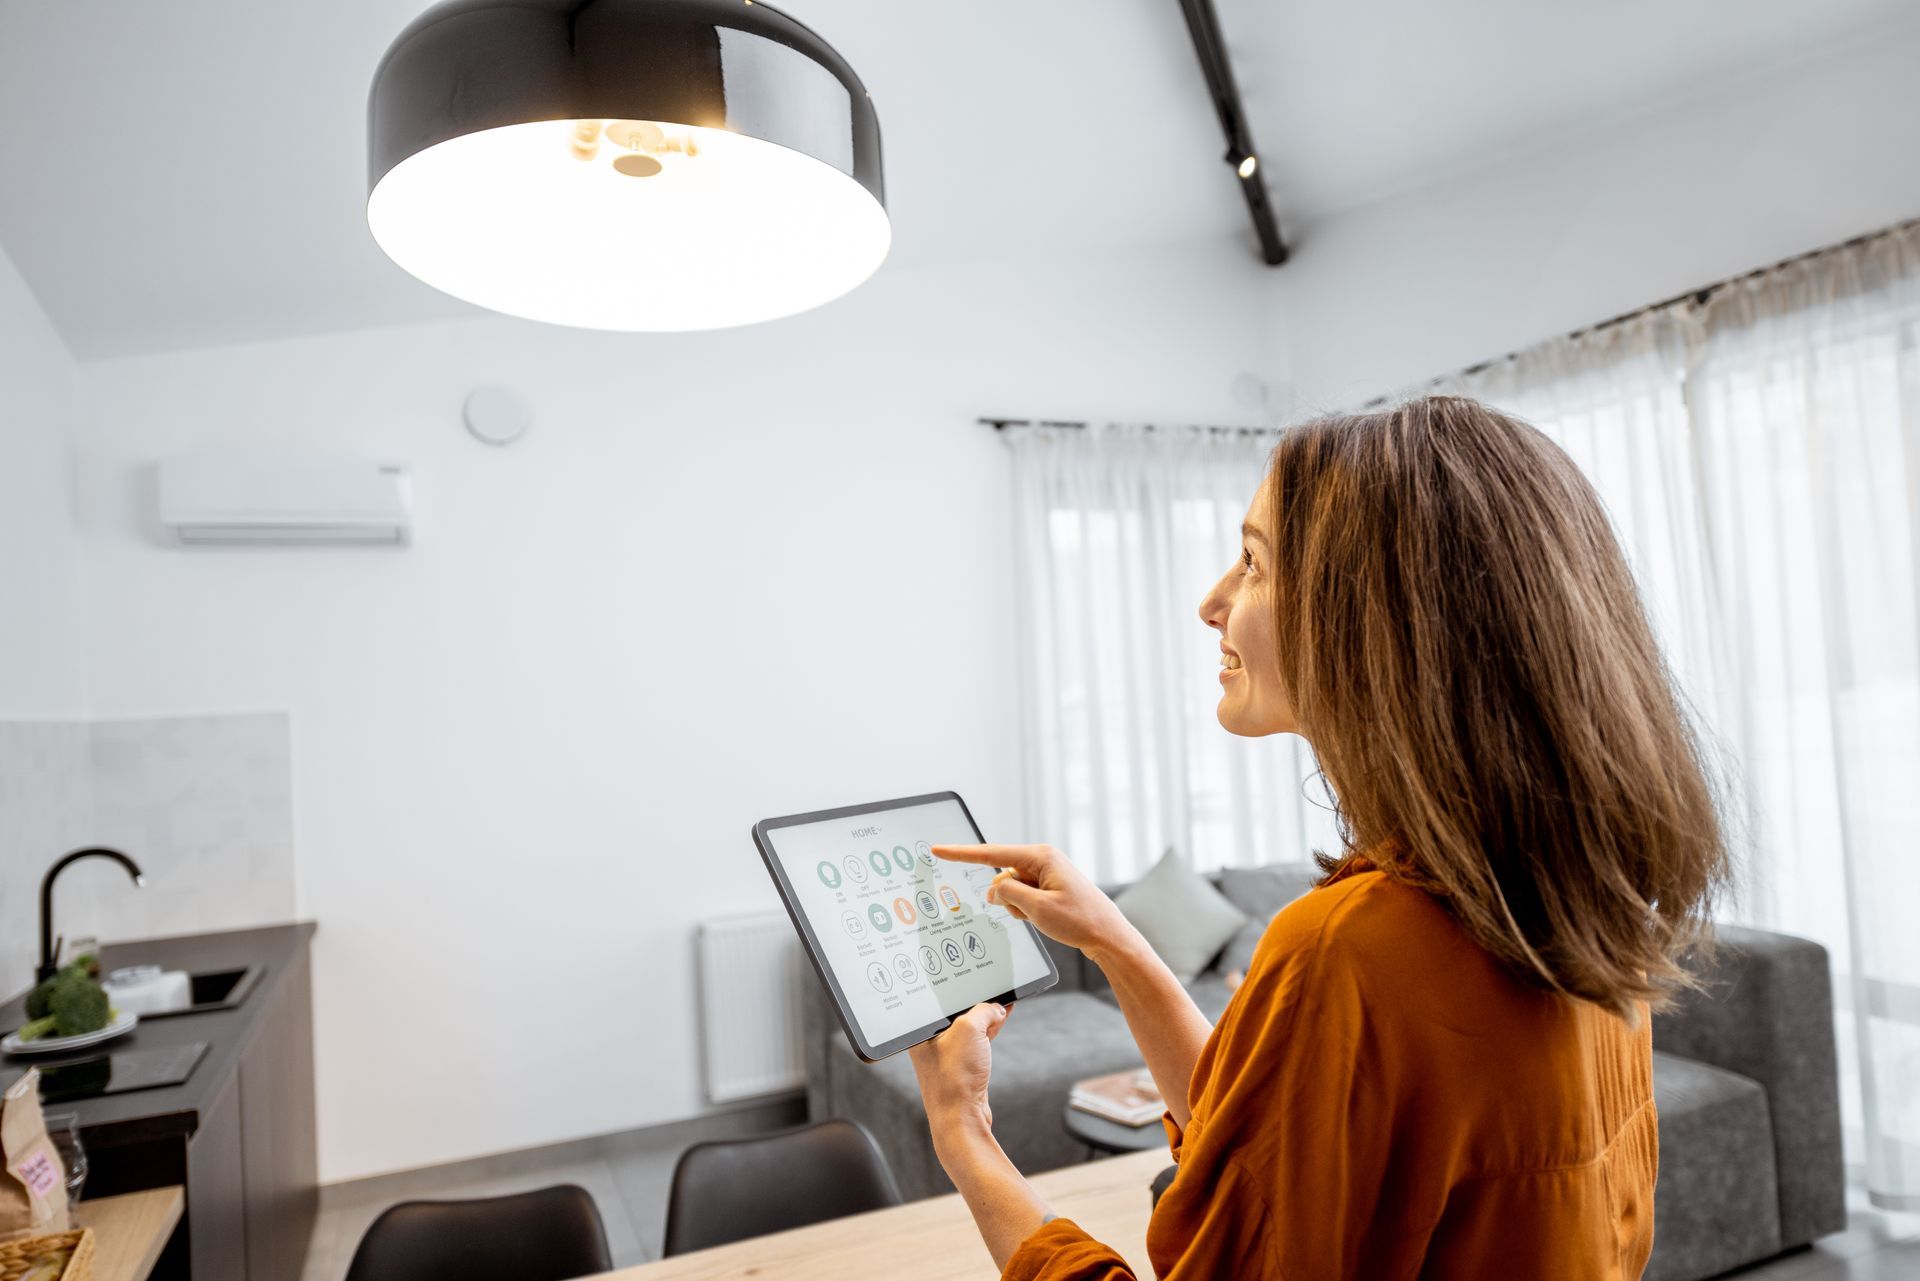 Smiling Woman at Her Smart Home